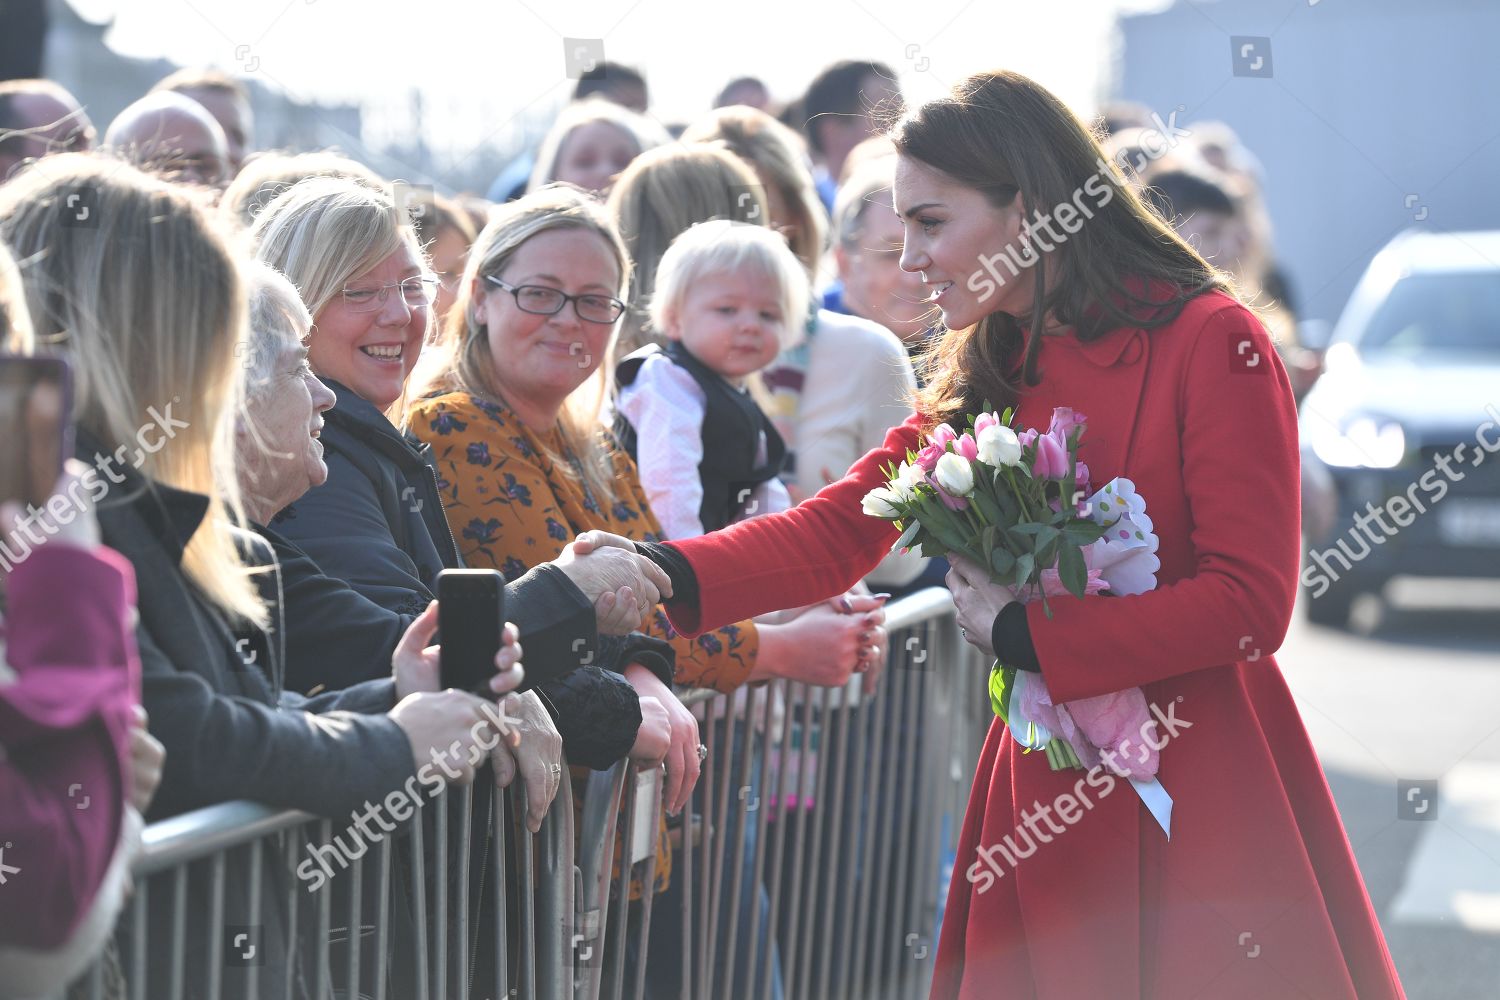 prince-william-and-catherine-duchess-of-cambridge-visit-to-northern-ireland-shutterstock-editorial-10122058a.jpg